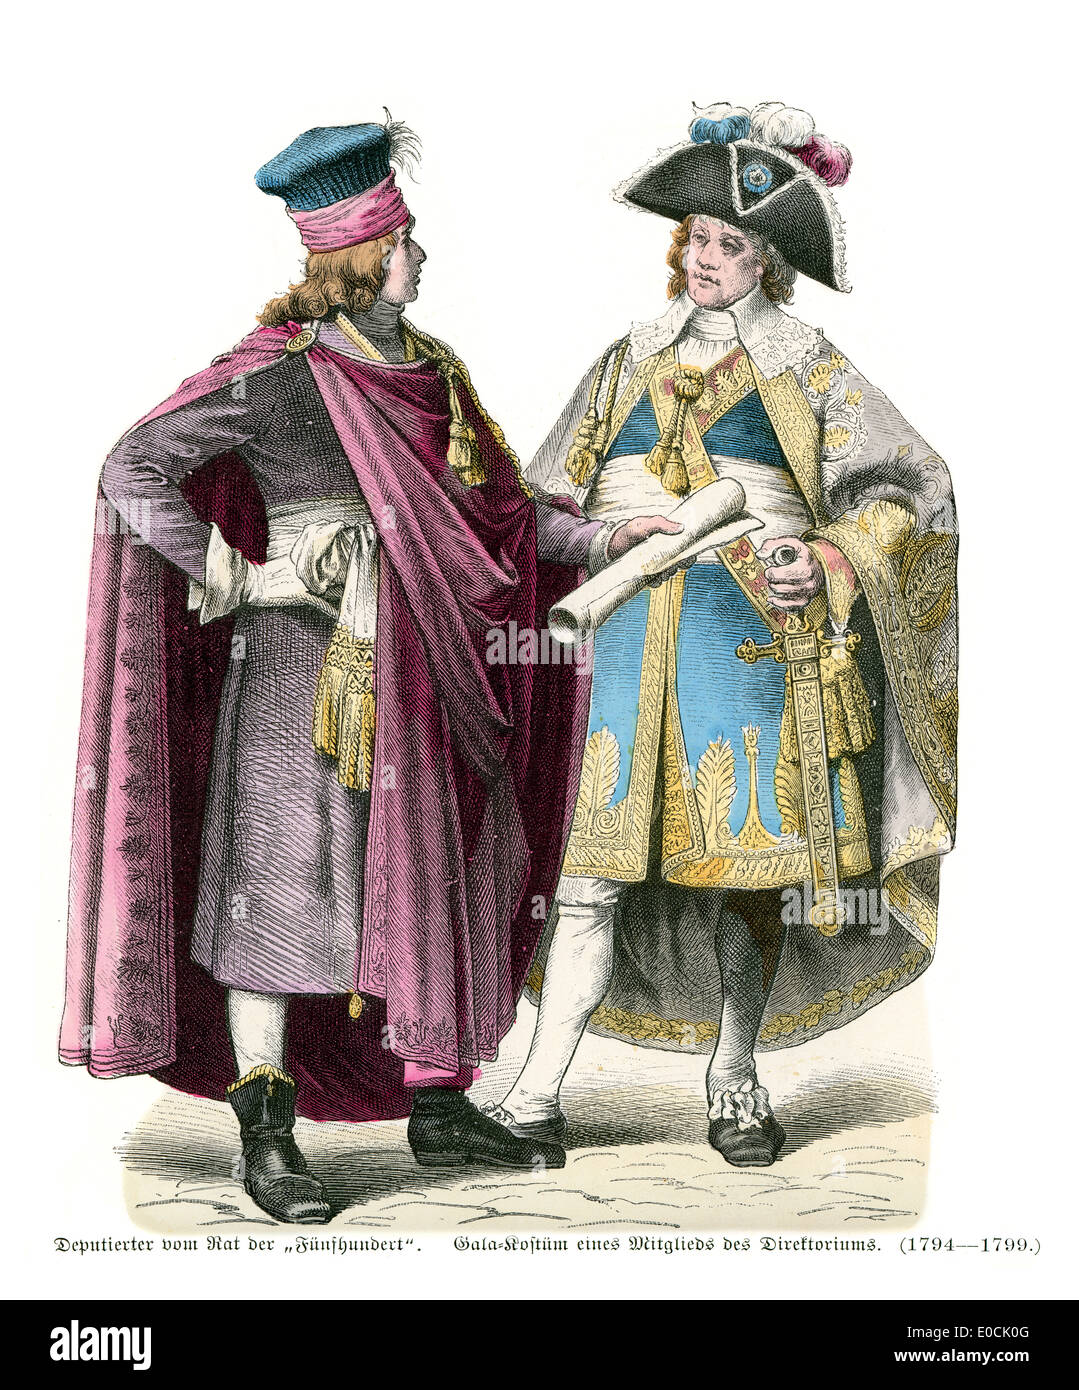 Costumes of 18th Century France. Director and Deputy of the Counsel of the 500 Stock Photo